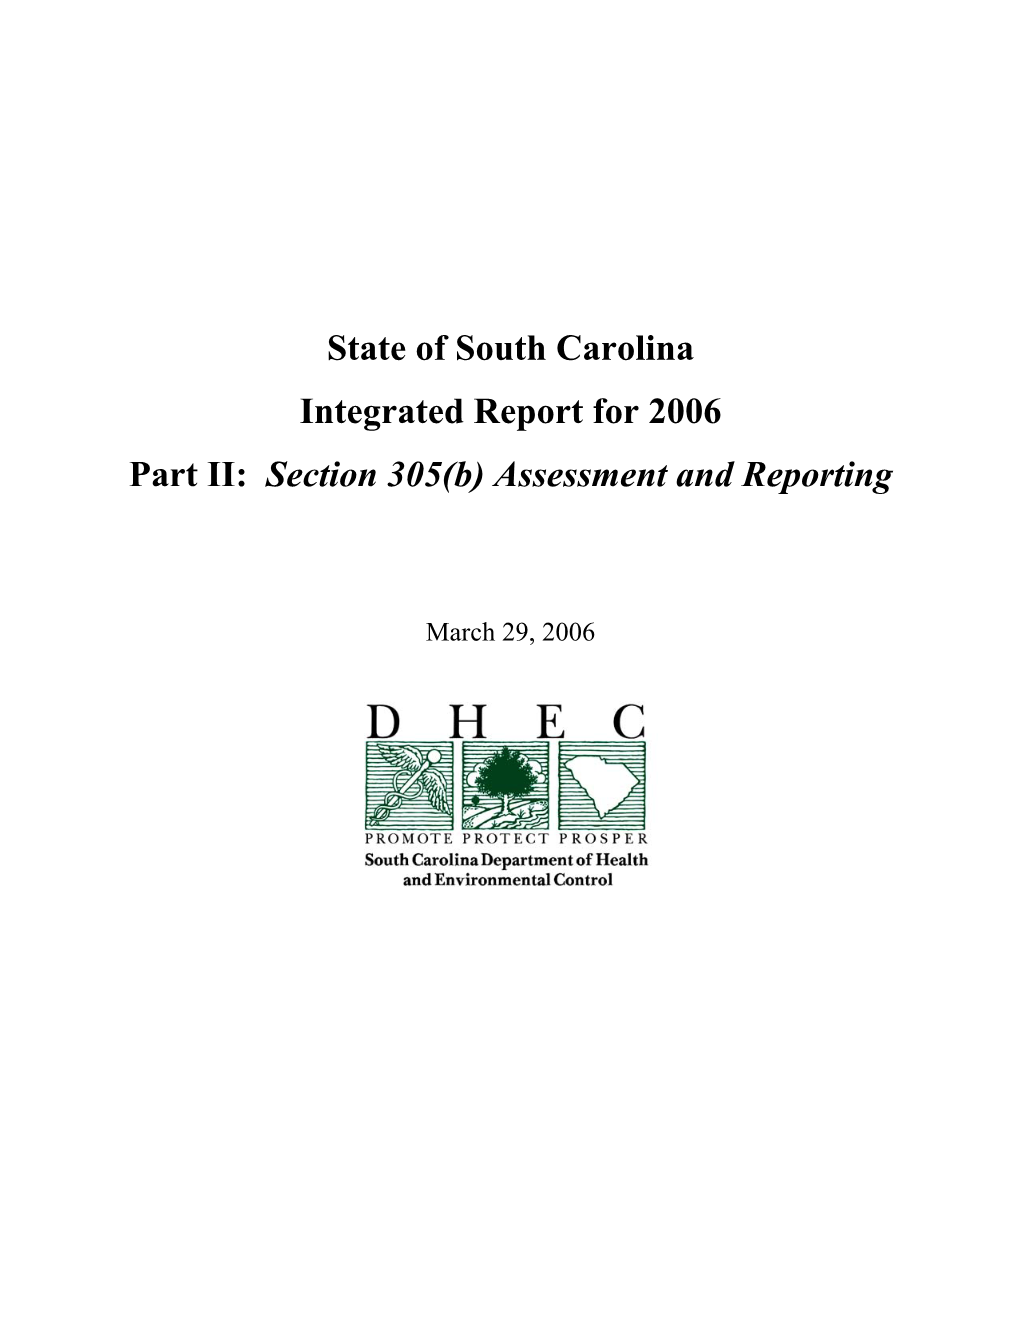 Section 305(B) Assessment and Reporting